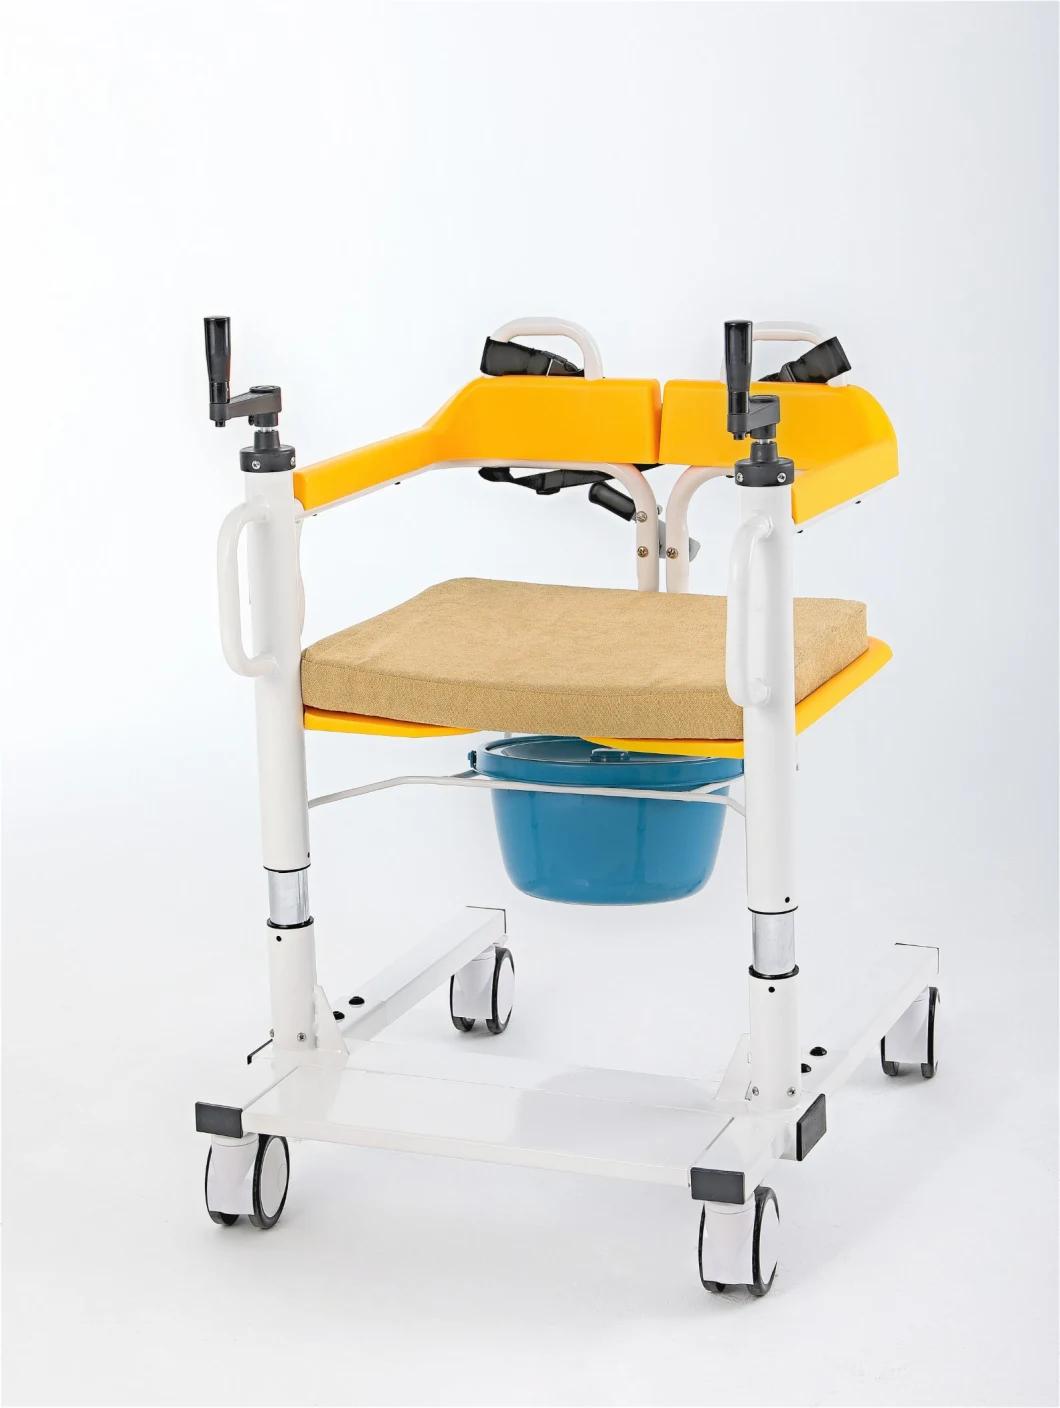 Mn-Ywj001 Patient Moving Transfer Chair for Elderly Disabled Patient Lift